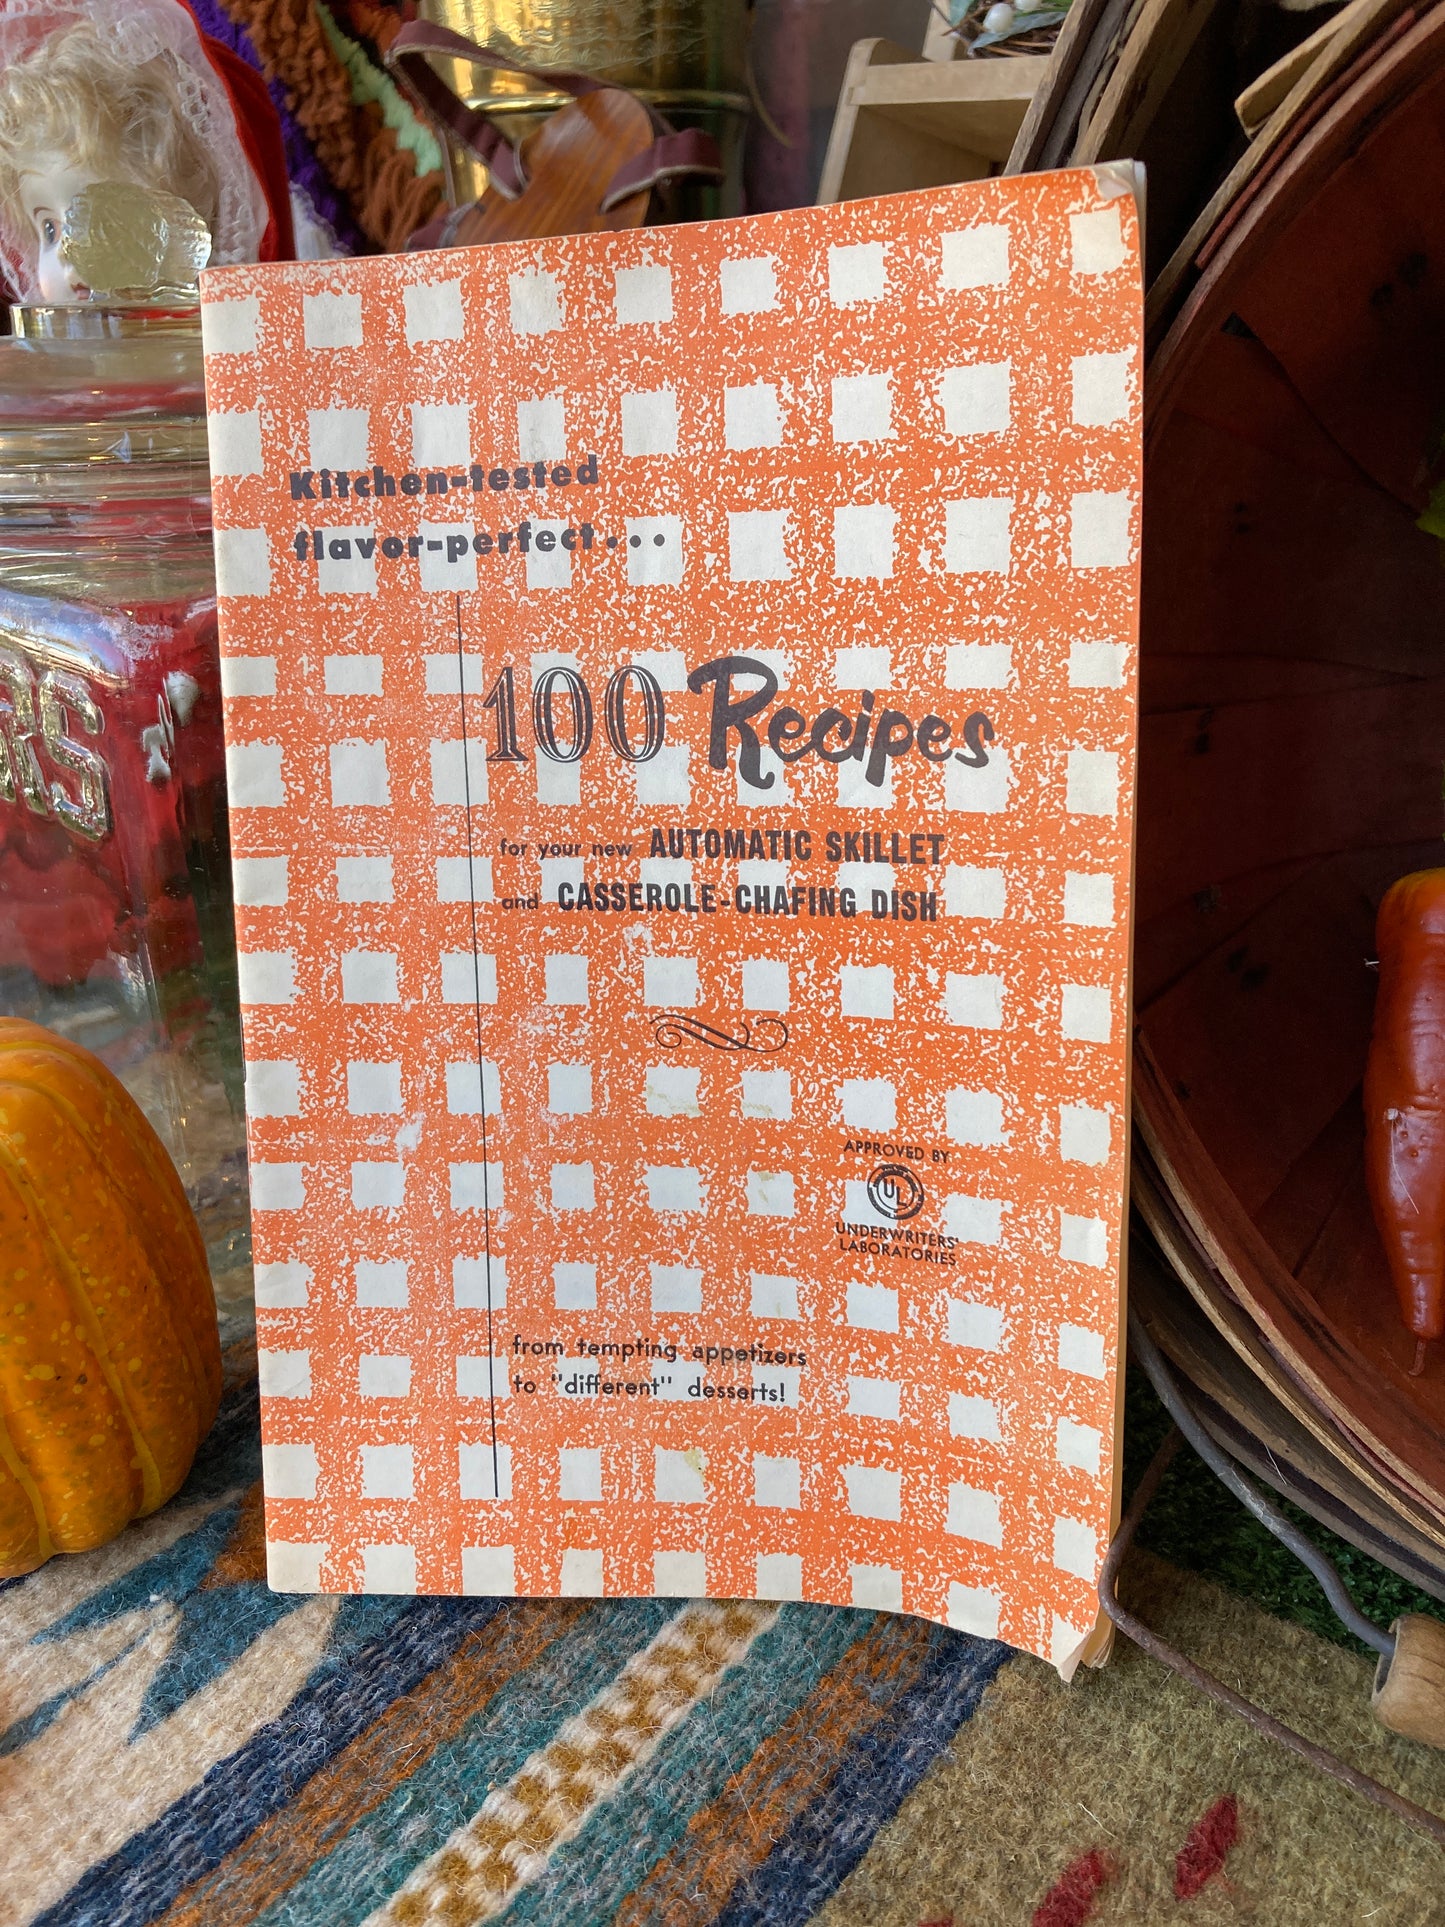 100 Recipes for your Automatic Skillet and Casserole Chafing Dish